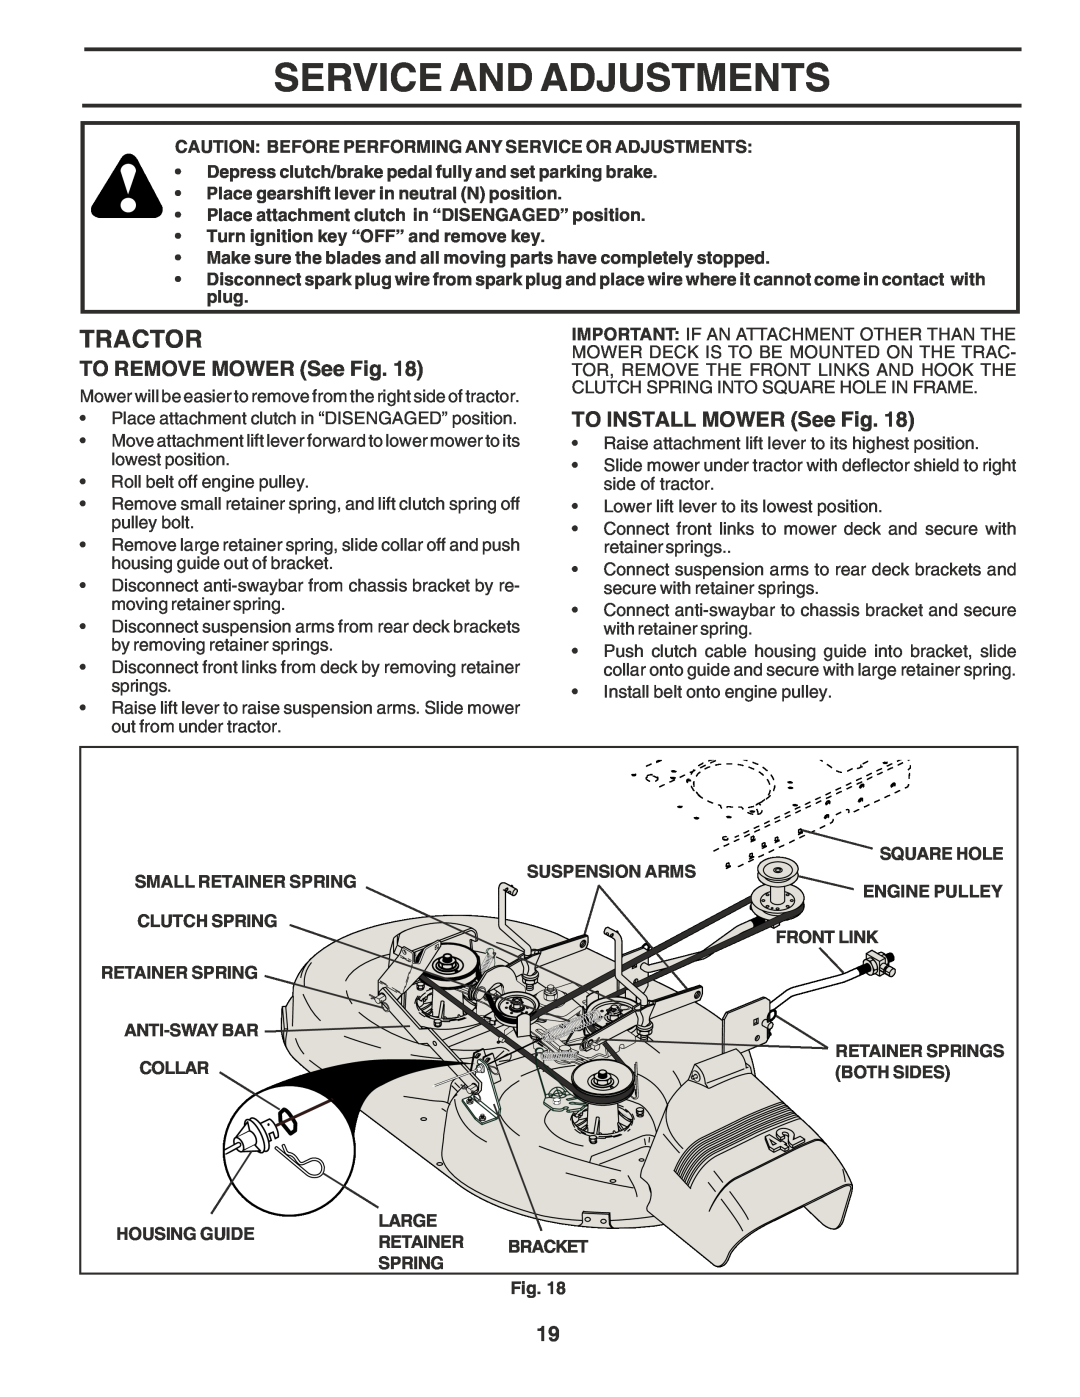 Poulan PR1842STA owner manual Service And Adjustments, TO REMOVE MOWER See Fig, TO INSTALL MOWER See Fig, Tractor 